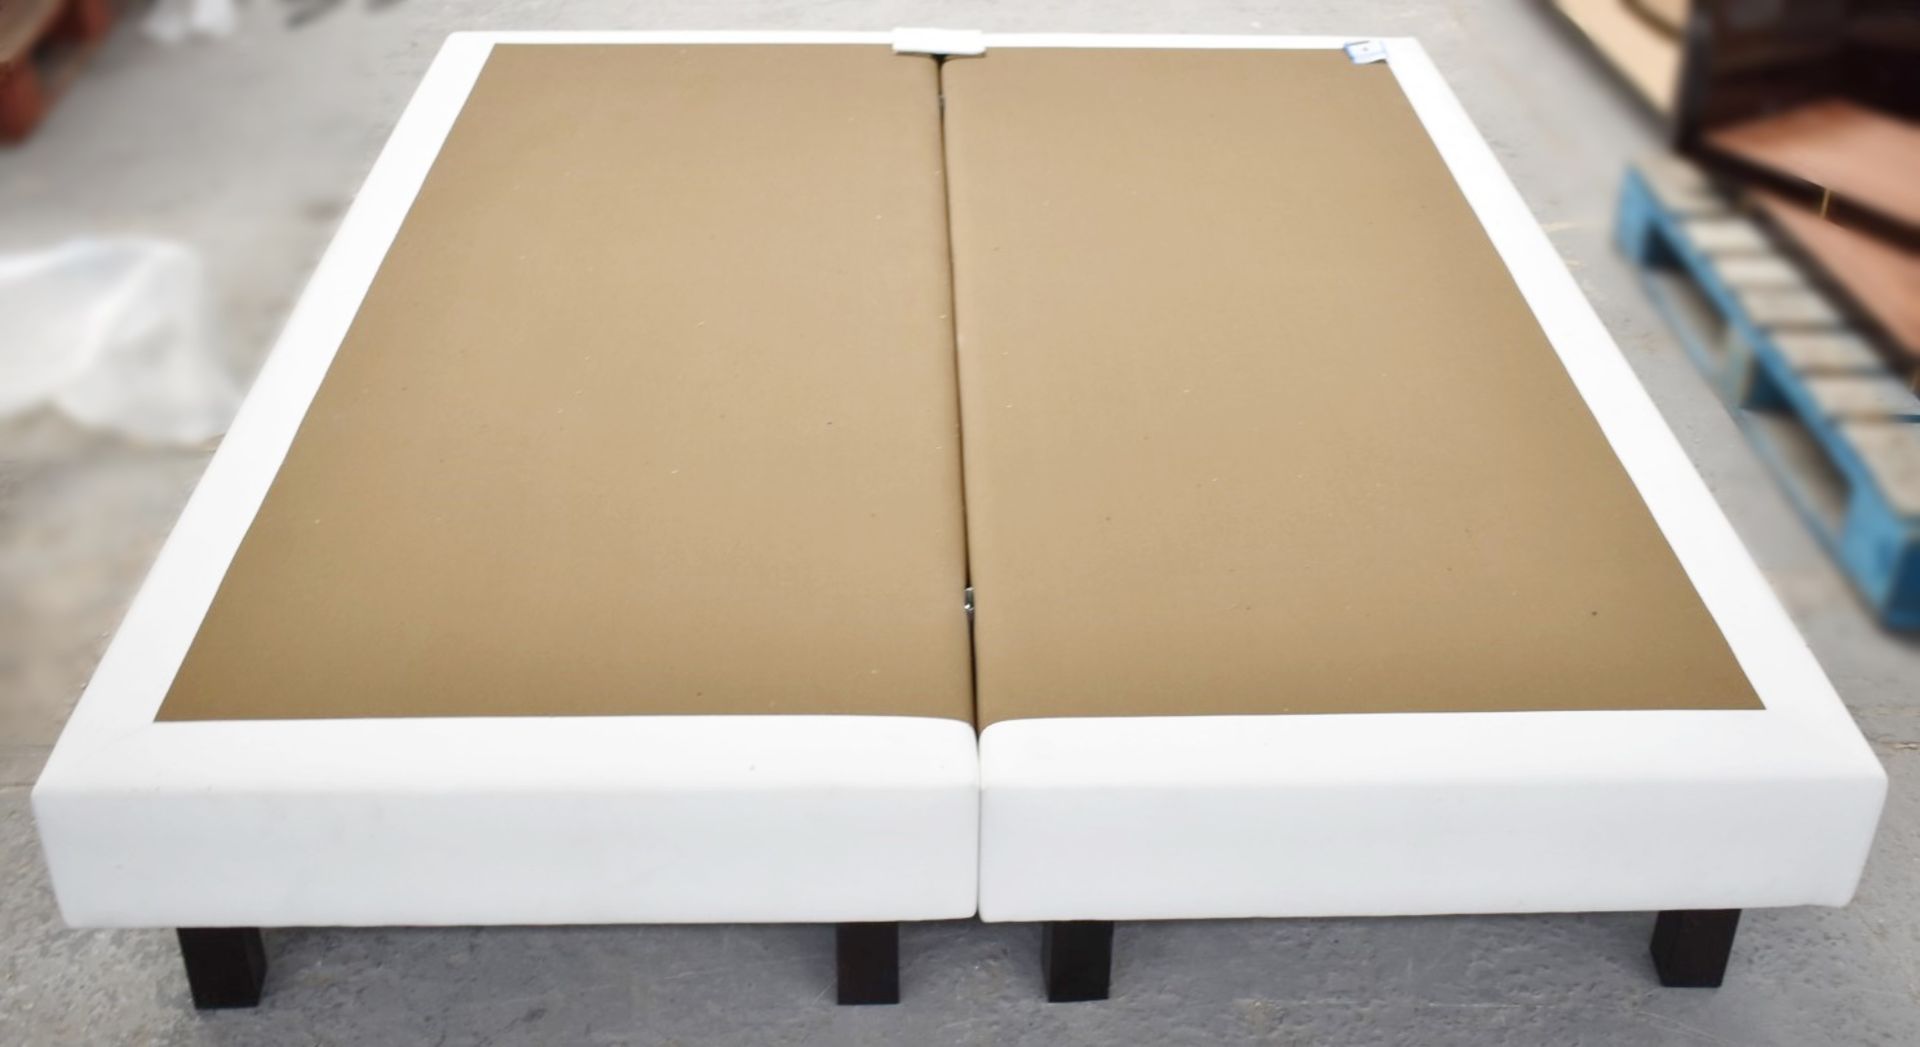 1 x COLUNEX 'Sommier Easy' European King Size Divan Bed Base In Luck White - Dimensions: 160x200cm - Image 2 of 5